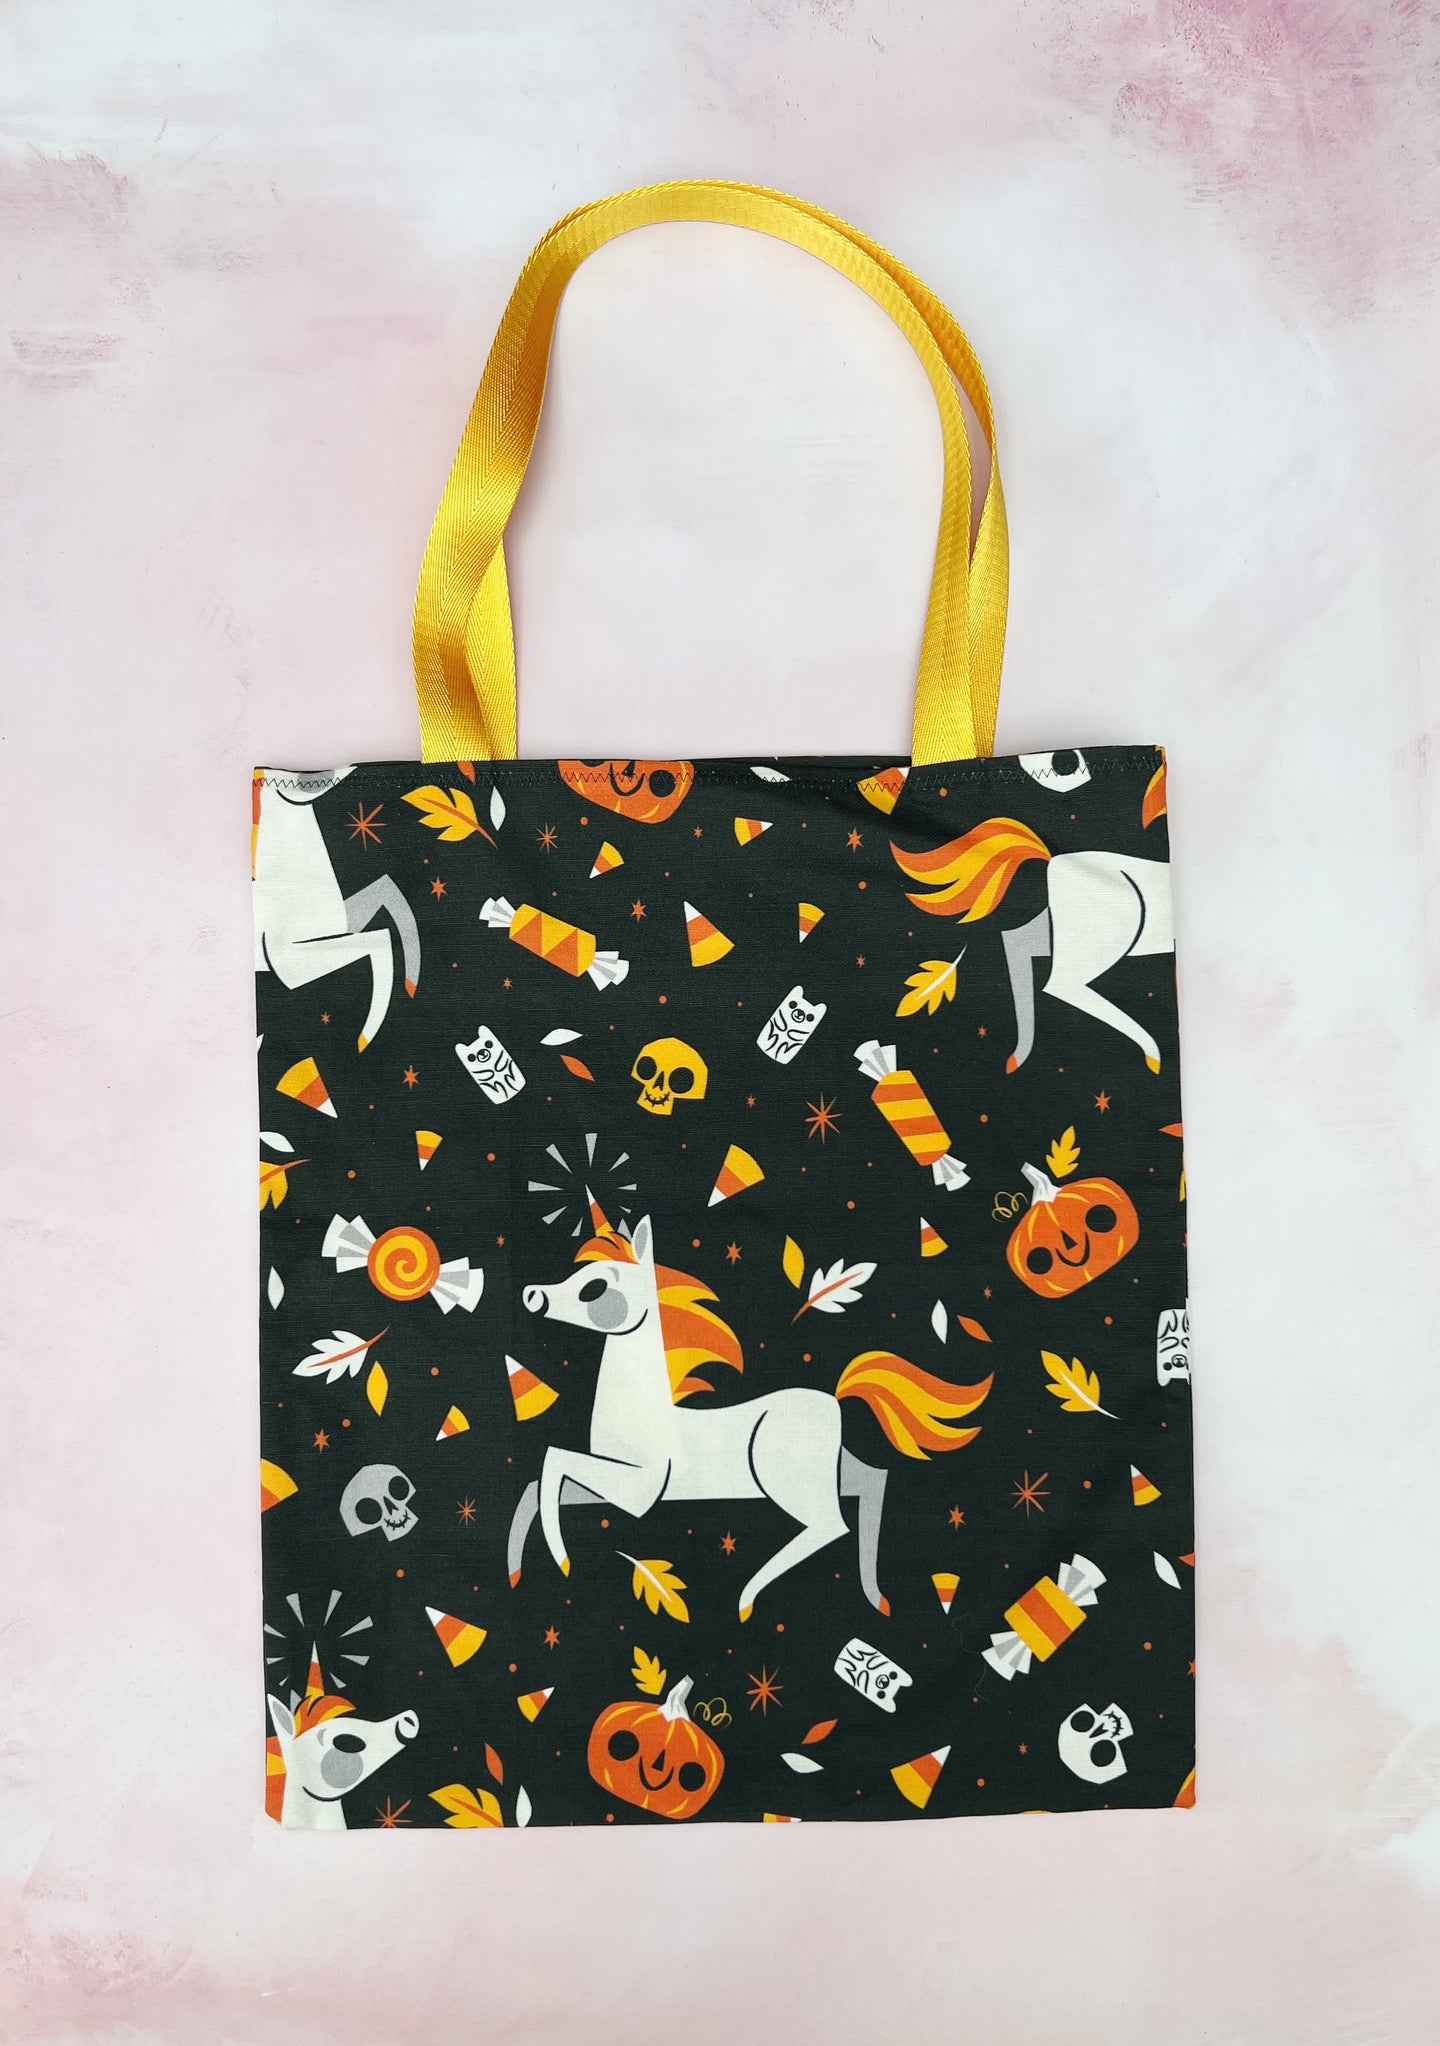 UniCandyCorn tote